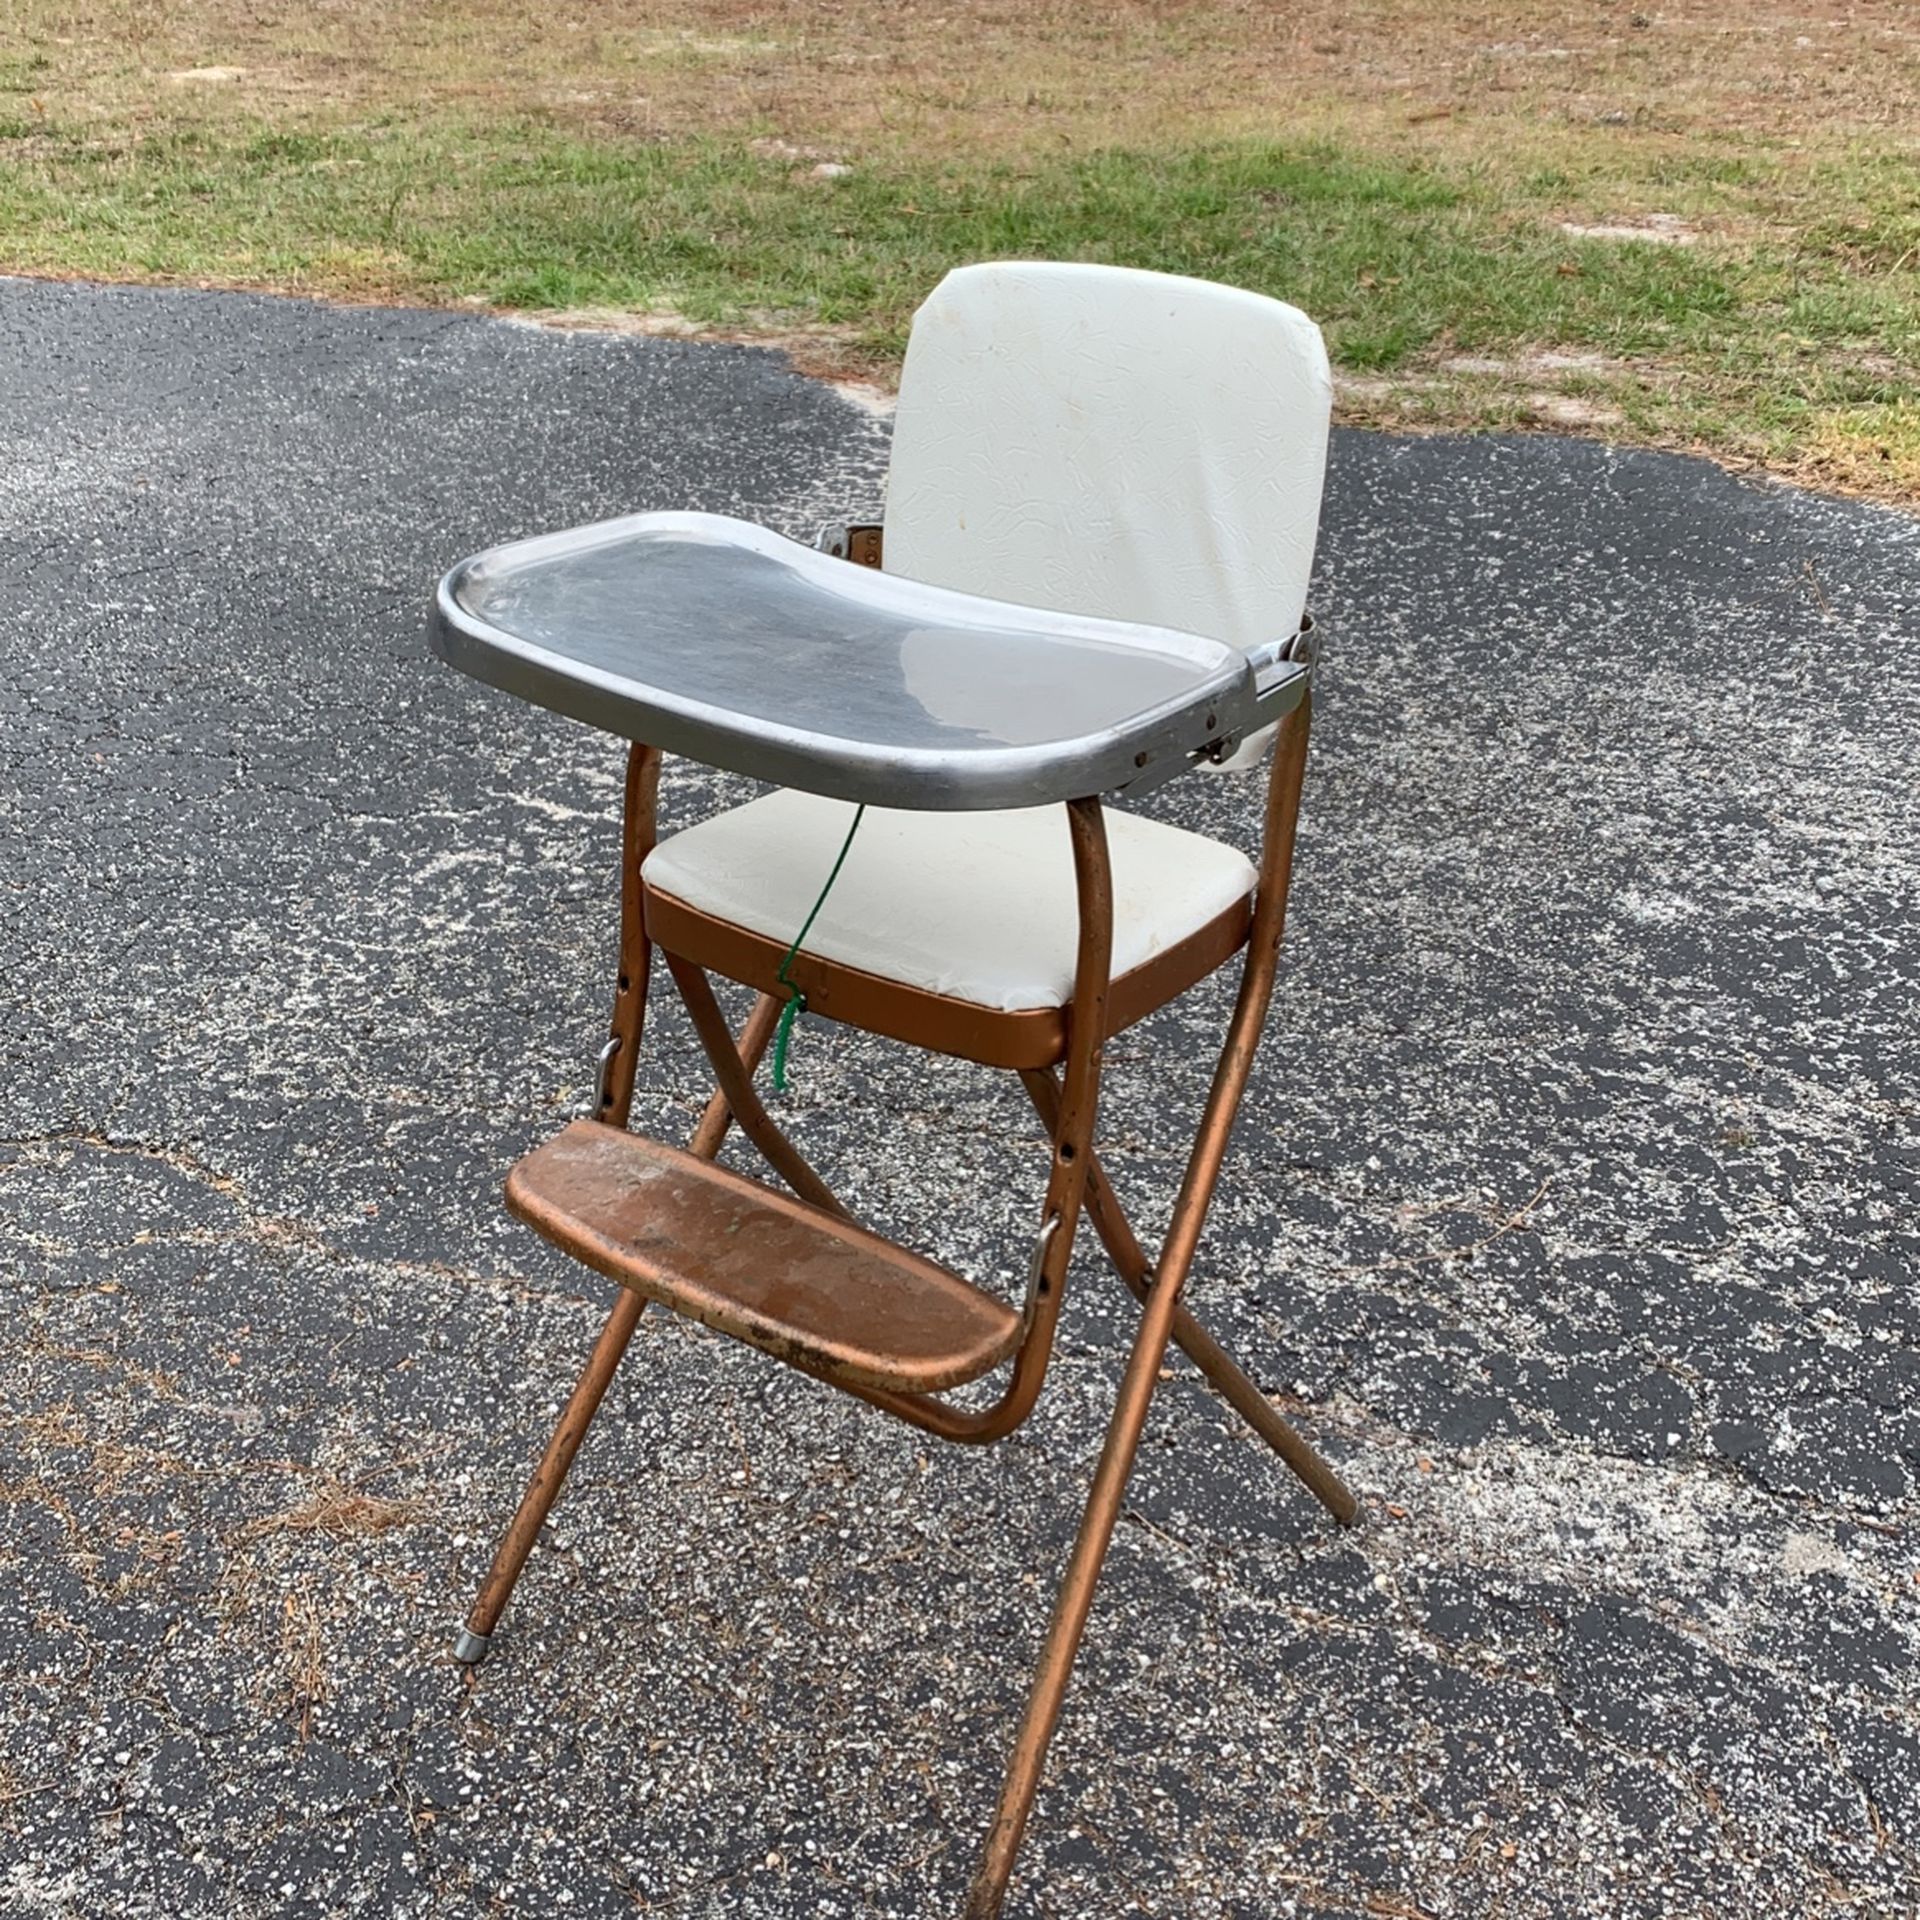 Antique high chair from the 50s